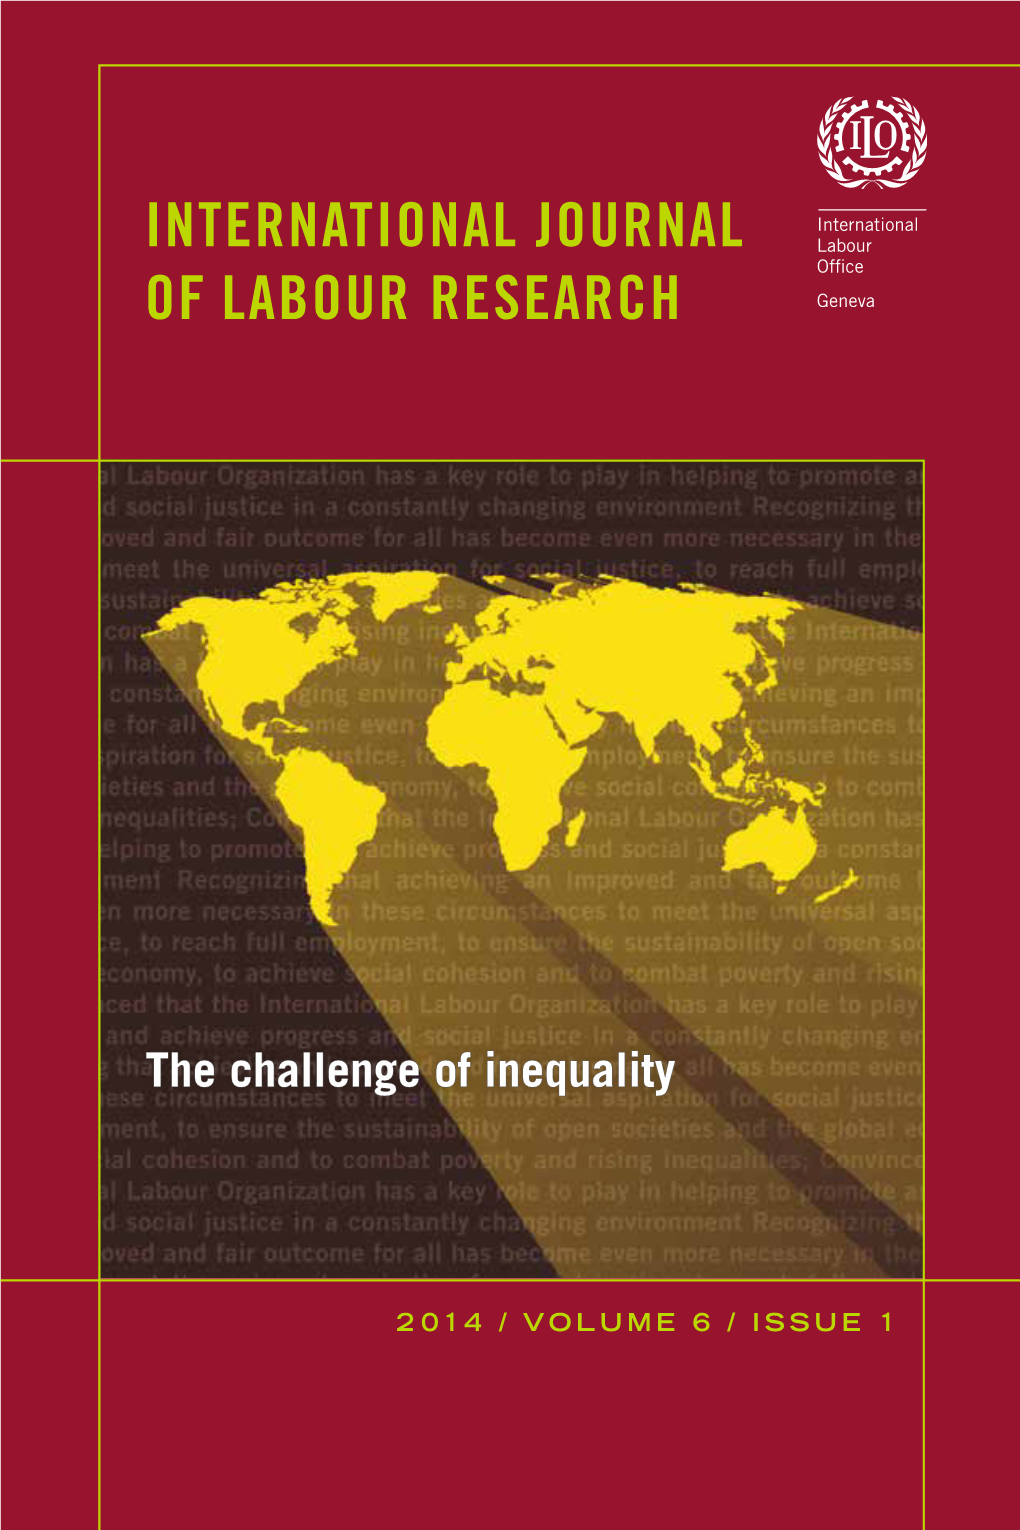 International Journal of Labour Research – 2014, Vol. 6, Issue 1